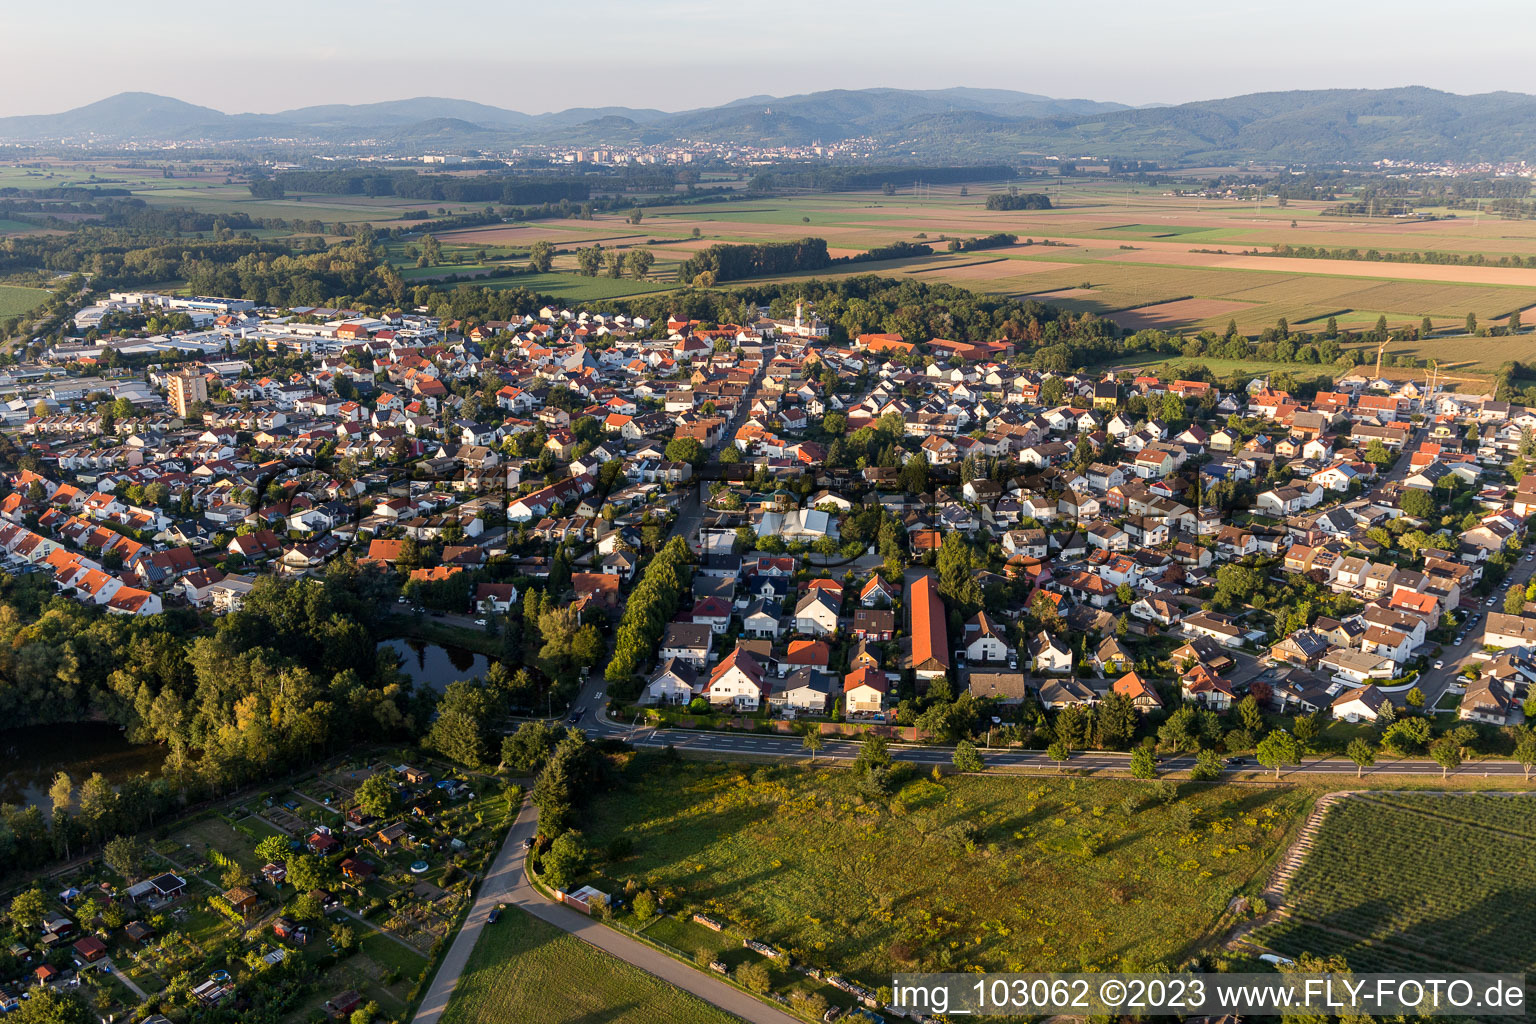 Hüttenfeld in the state Hesse, Germany seen from above